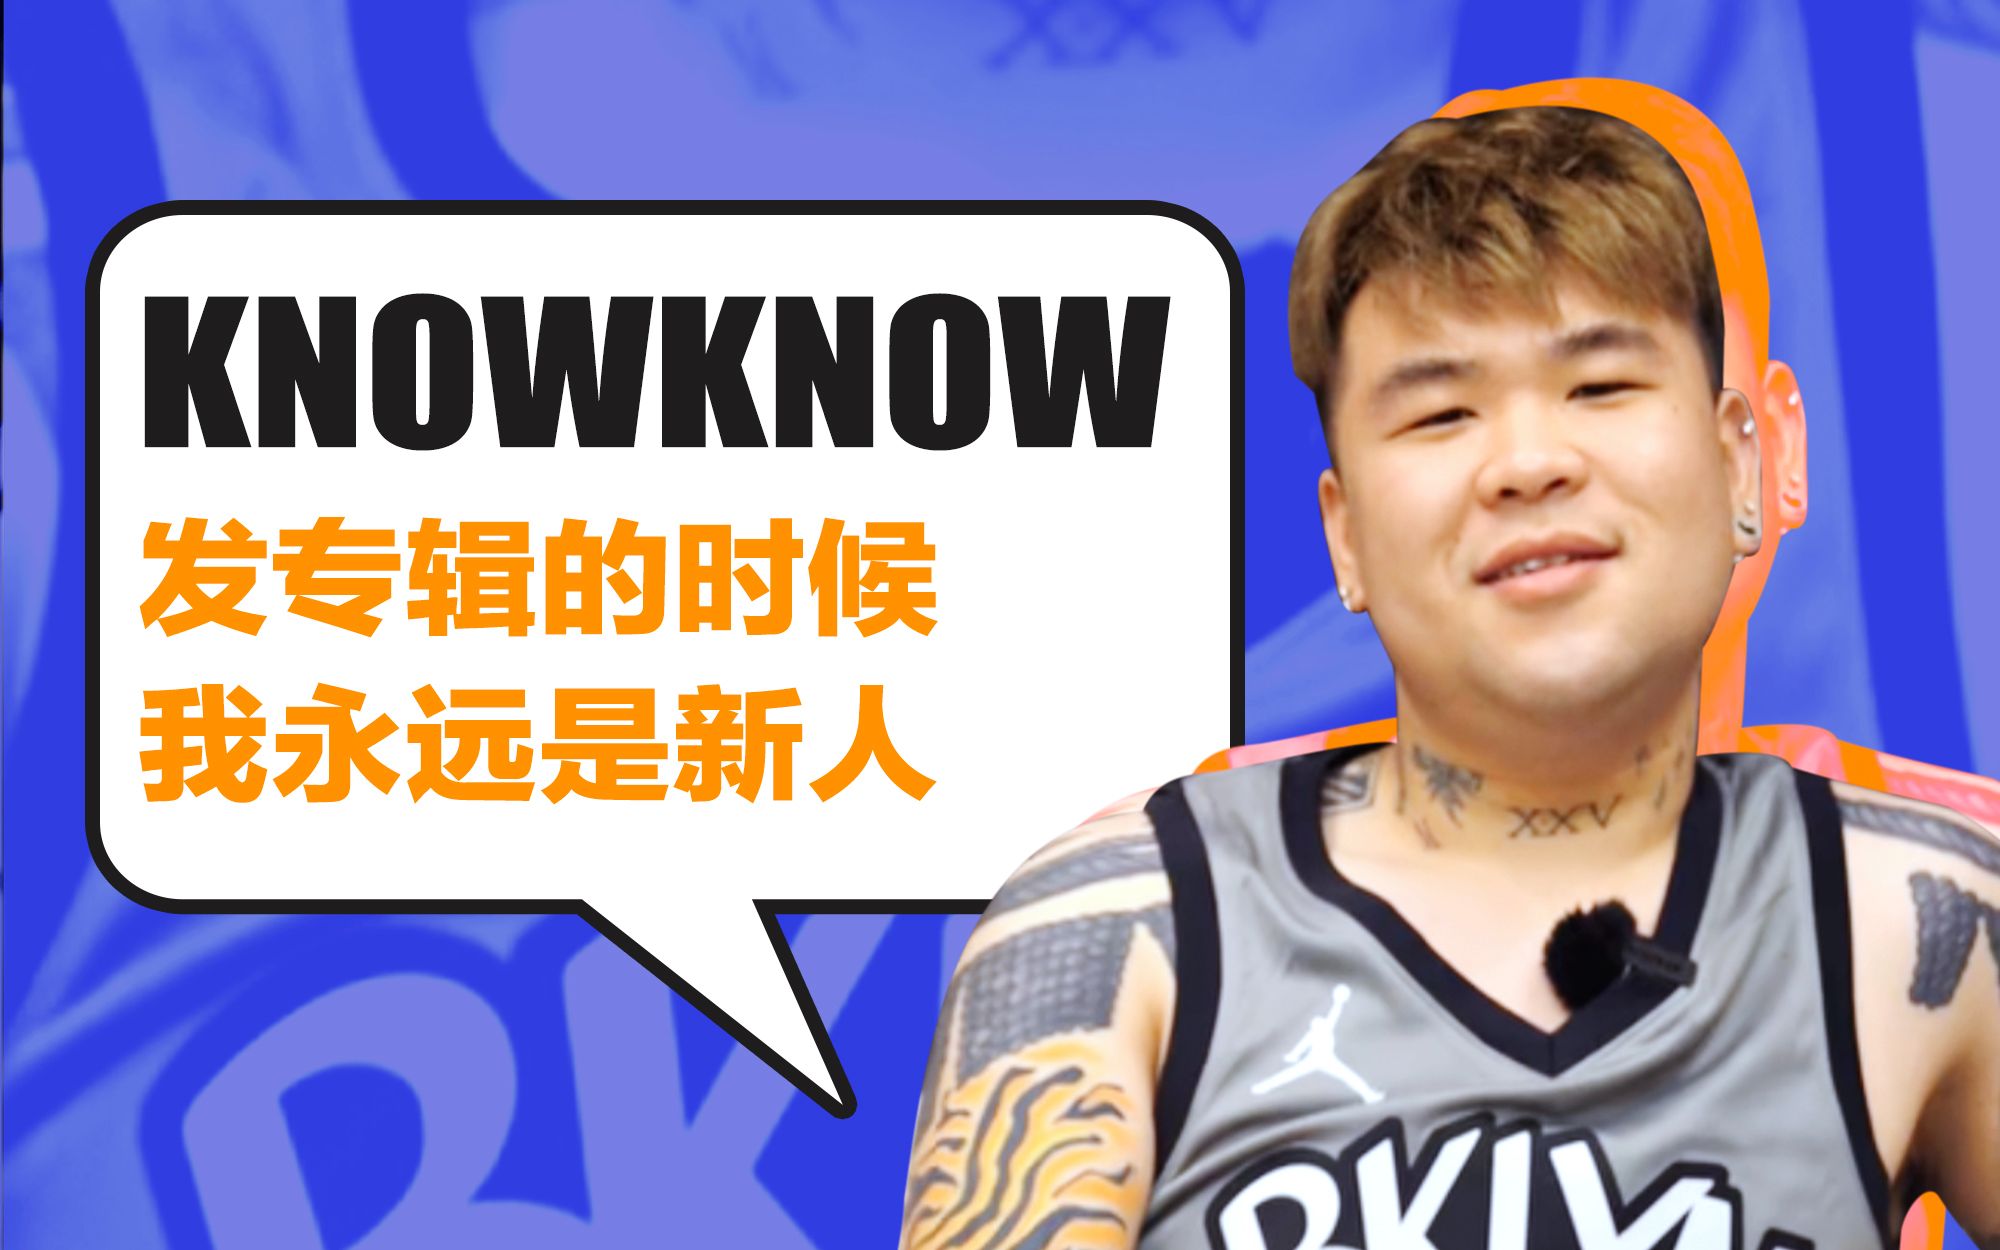 knowknow的纹身图片